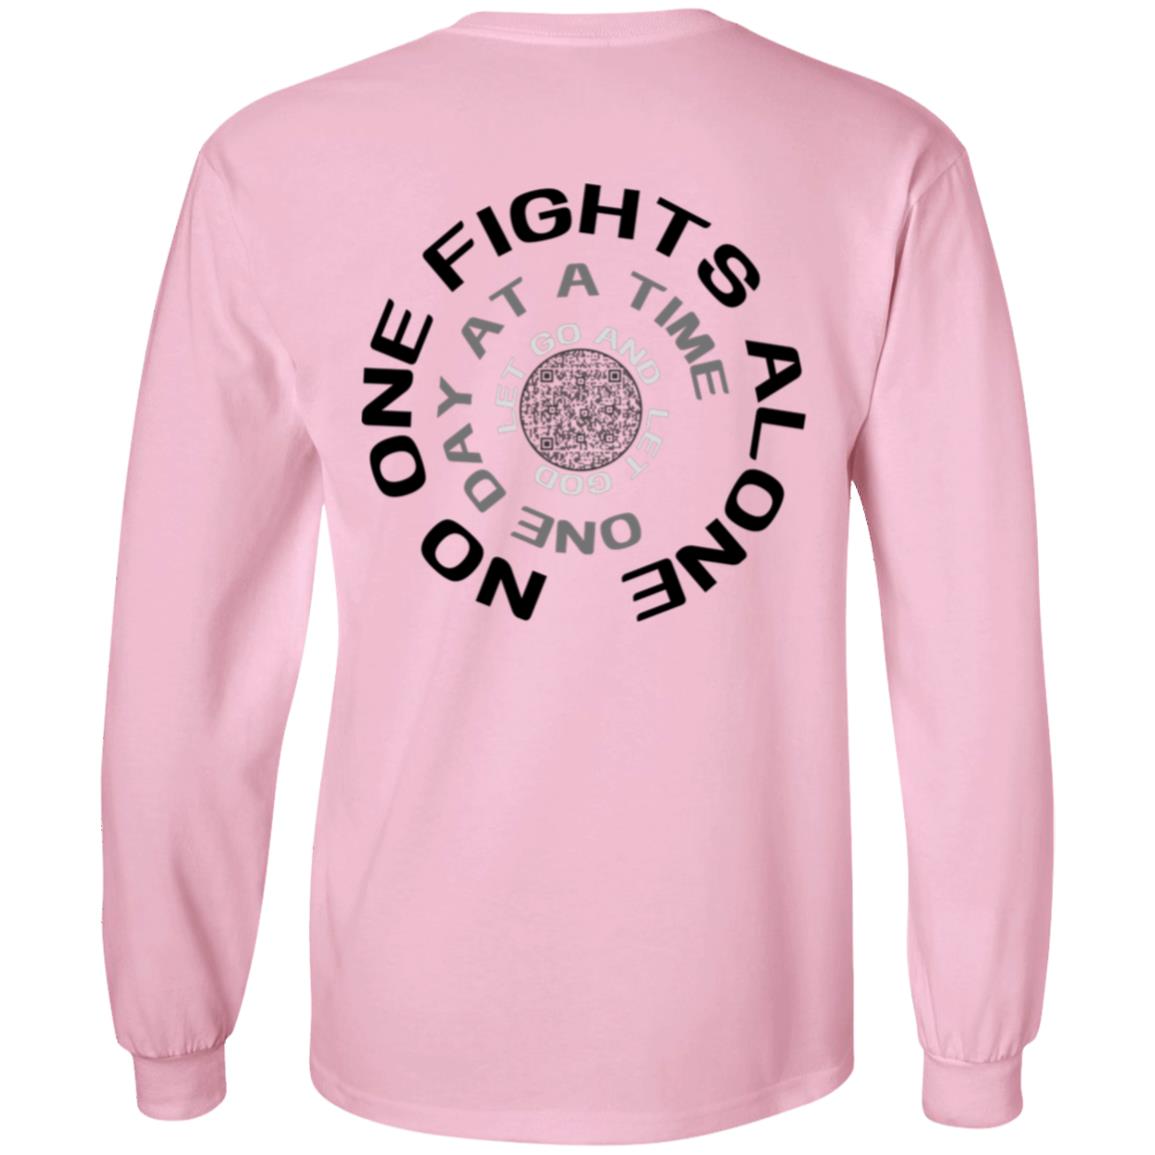 Together Strong Long sleeve Tee - HopeLinks QrClothes